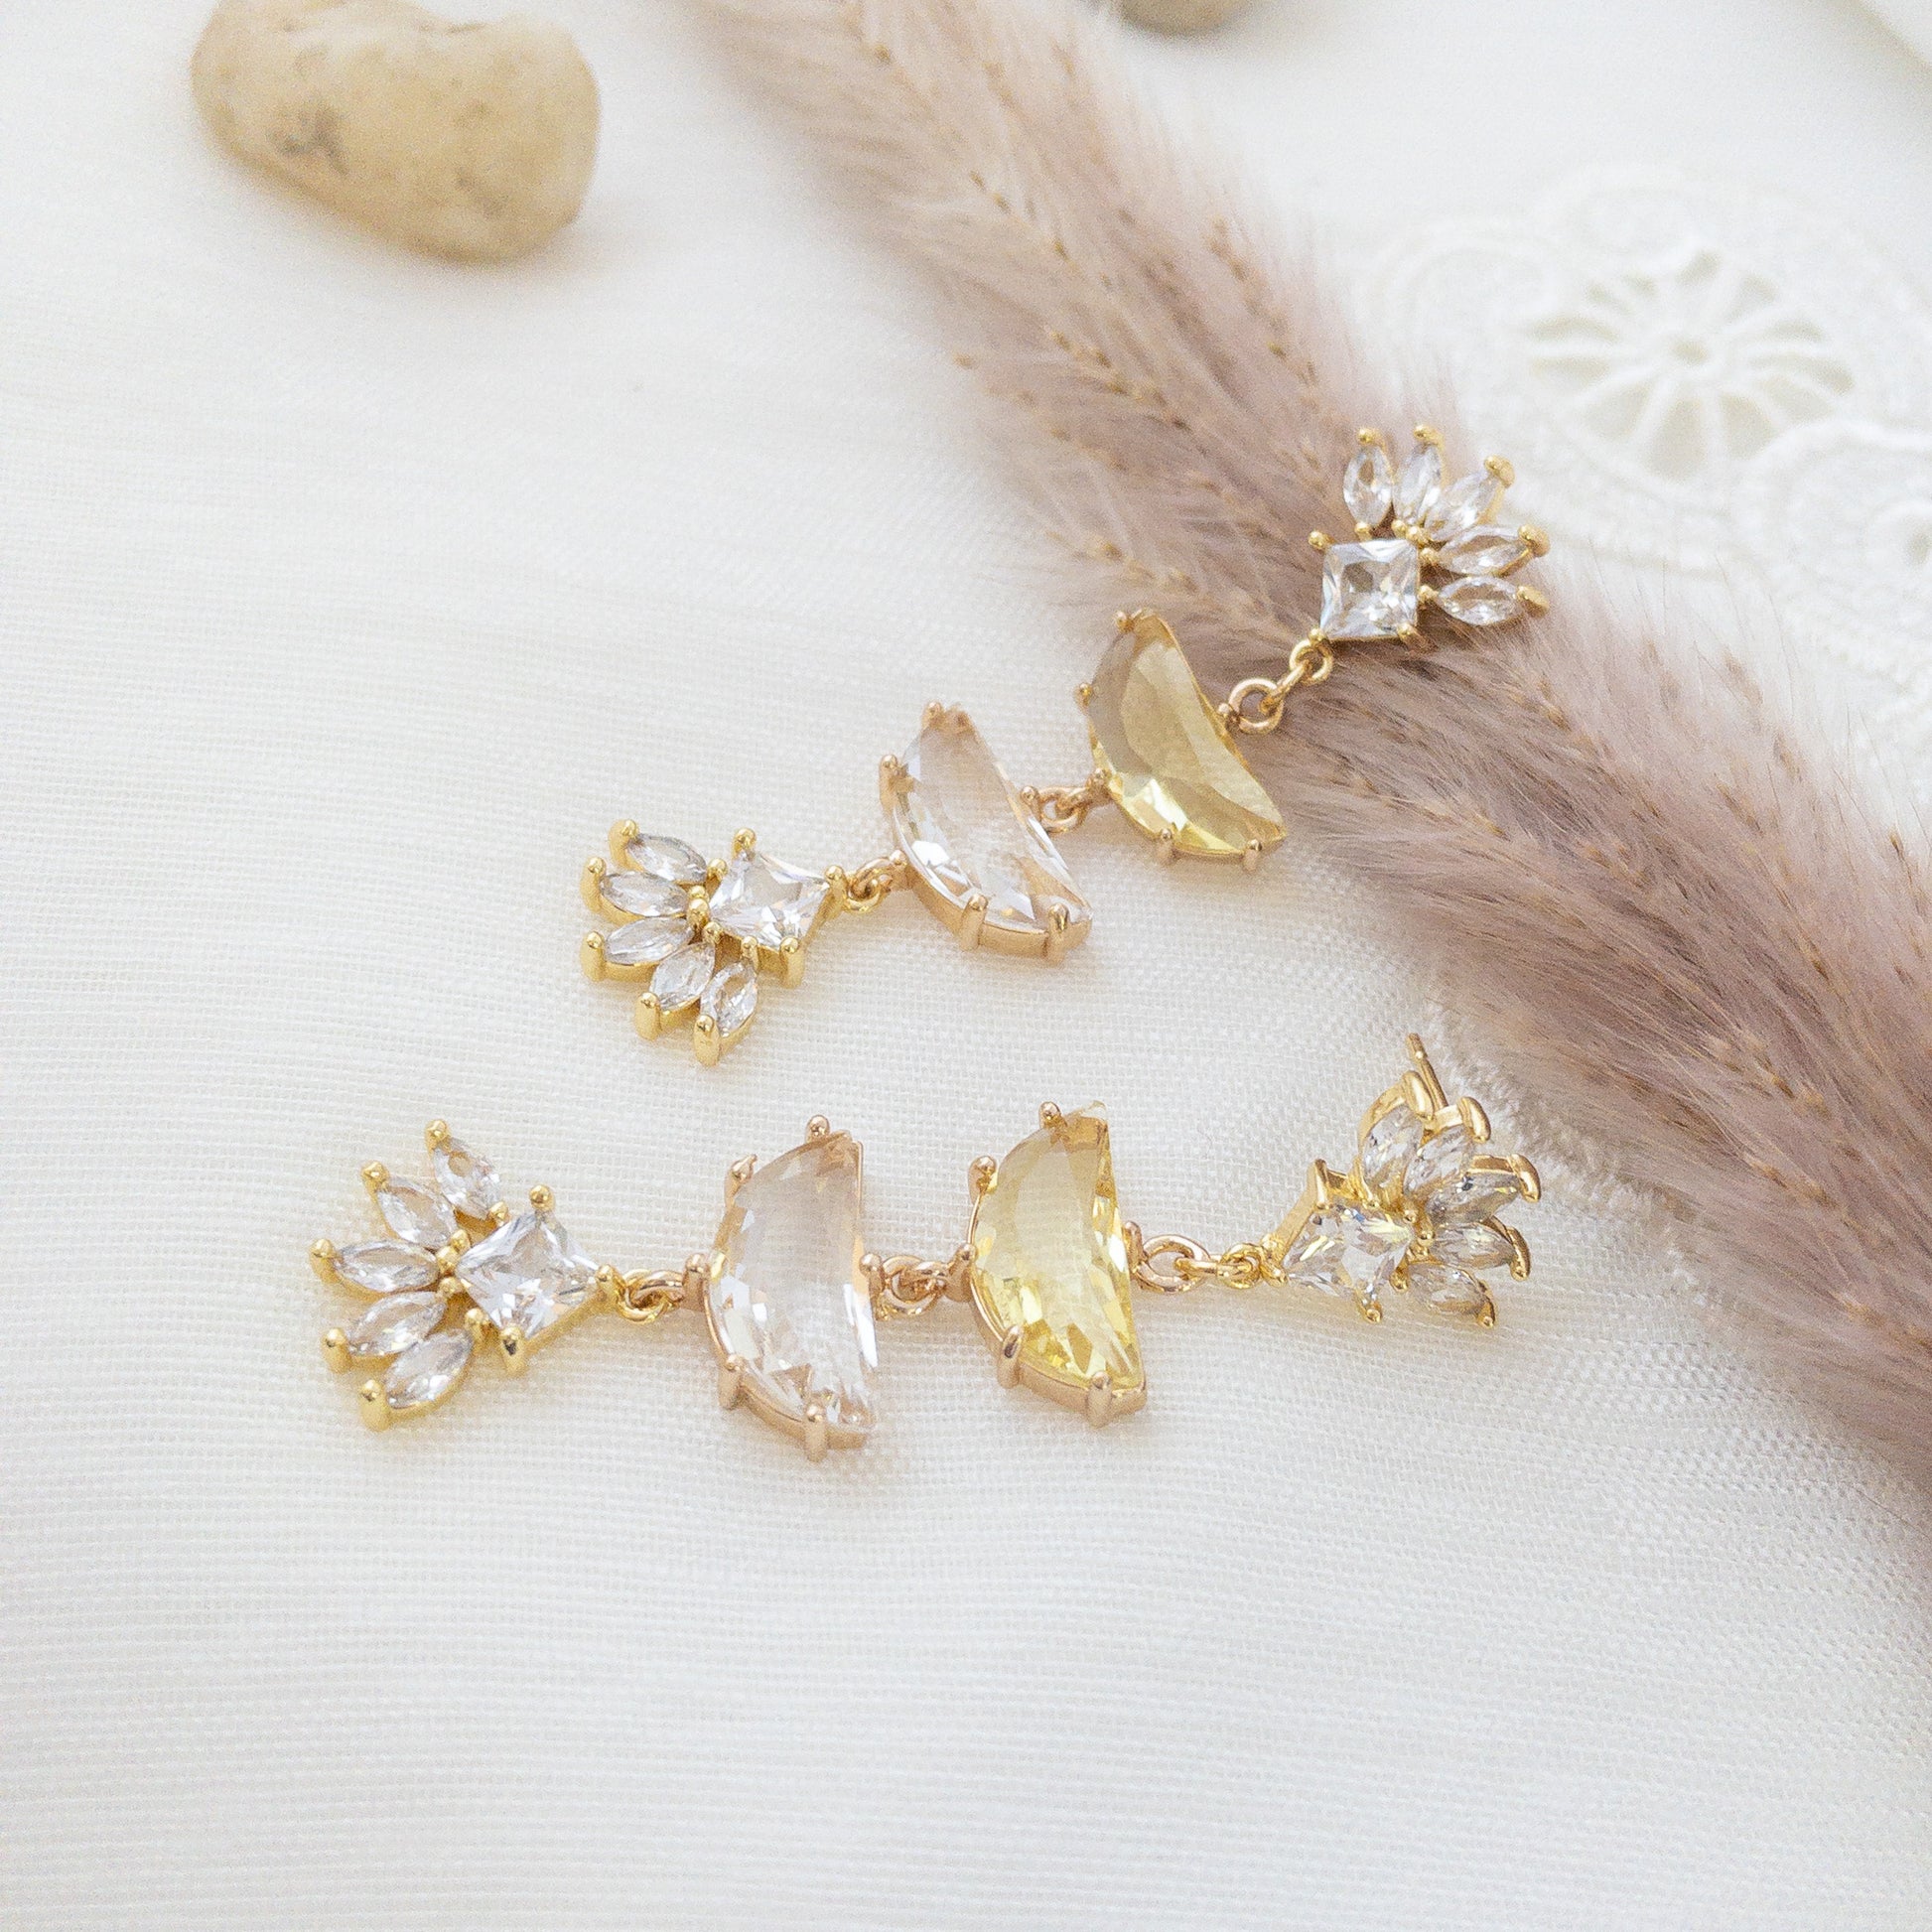 Crystal statement earrings with yellow crystal stones